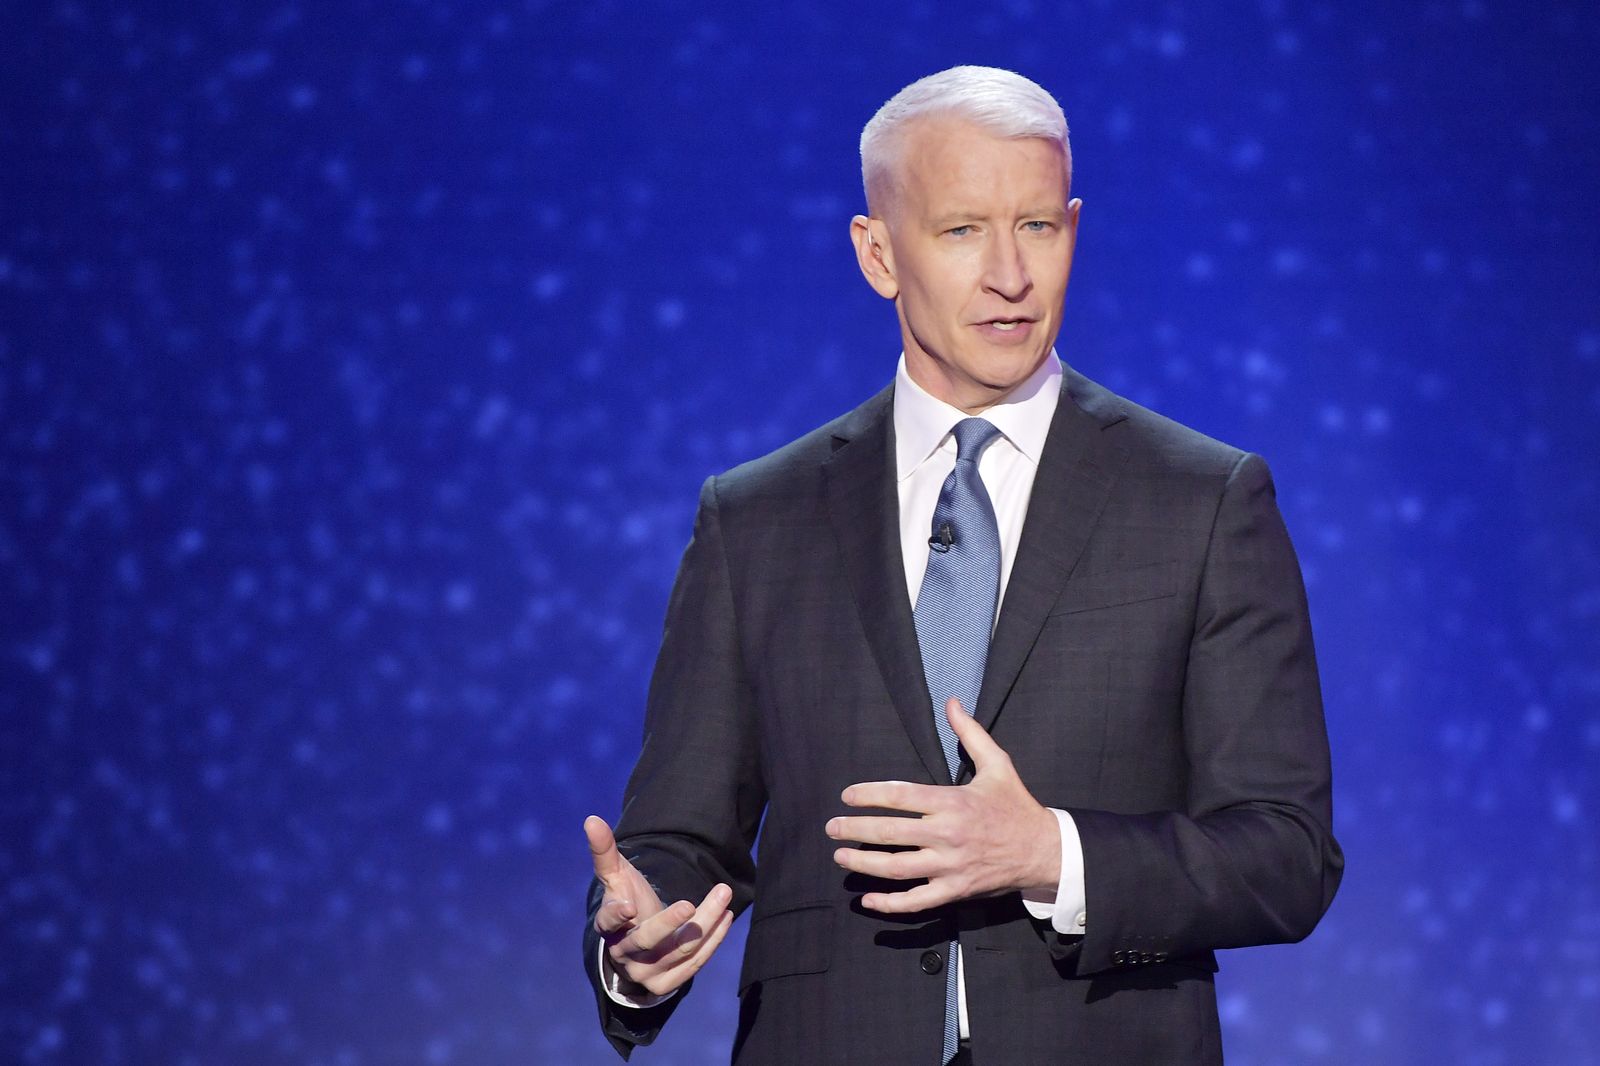 Anderson Cooper during the 12th Annual CNN Heroes: An All-Star Tribute on December 9, 2018, in New York City | Photo: Michael Loccisano/Getty Images